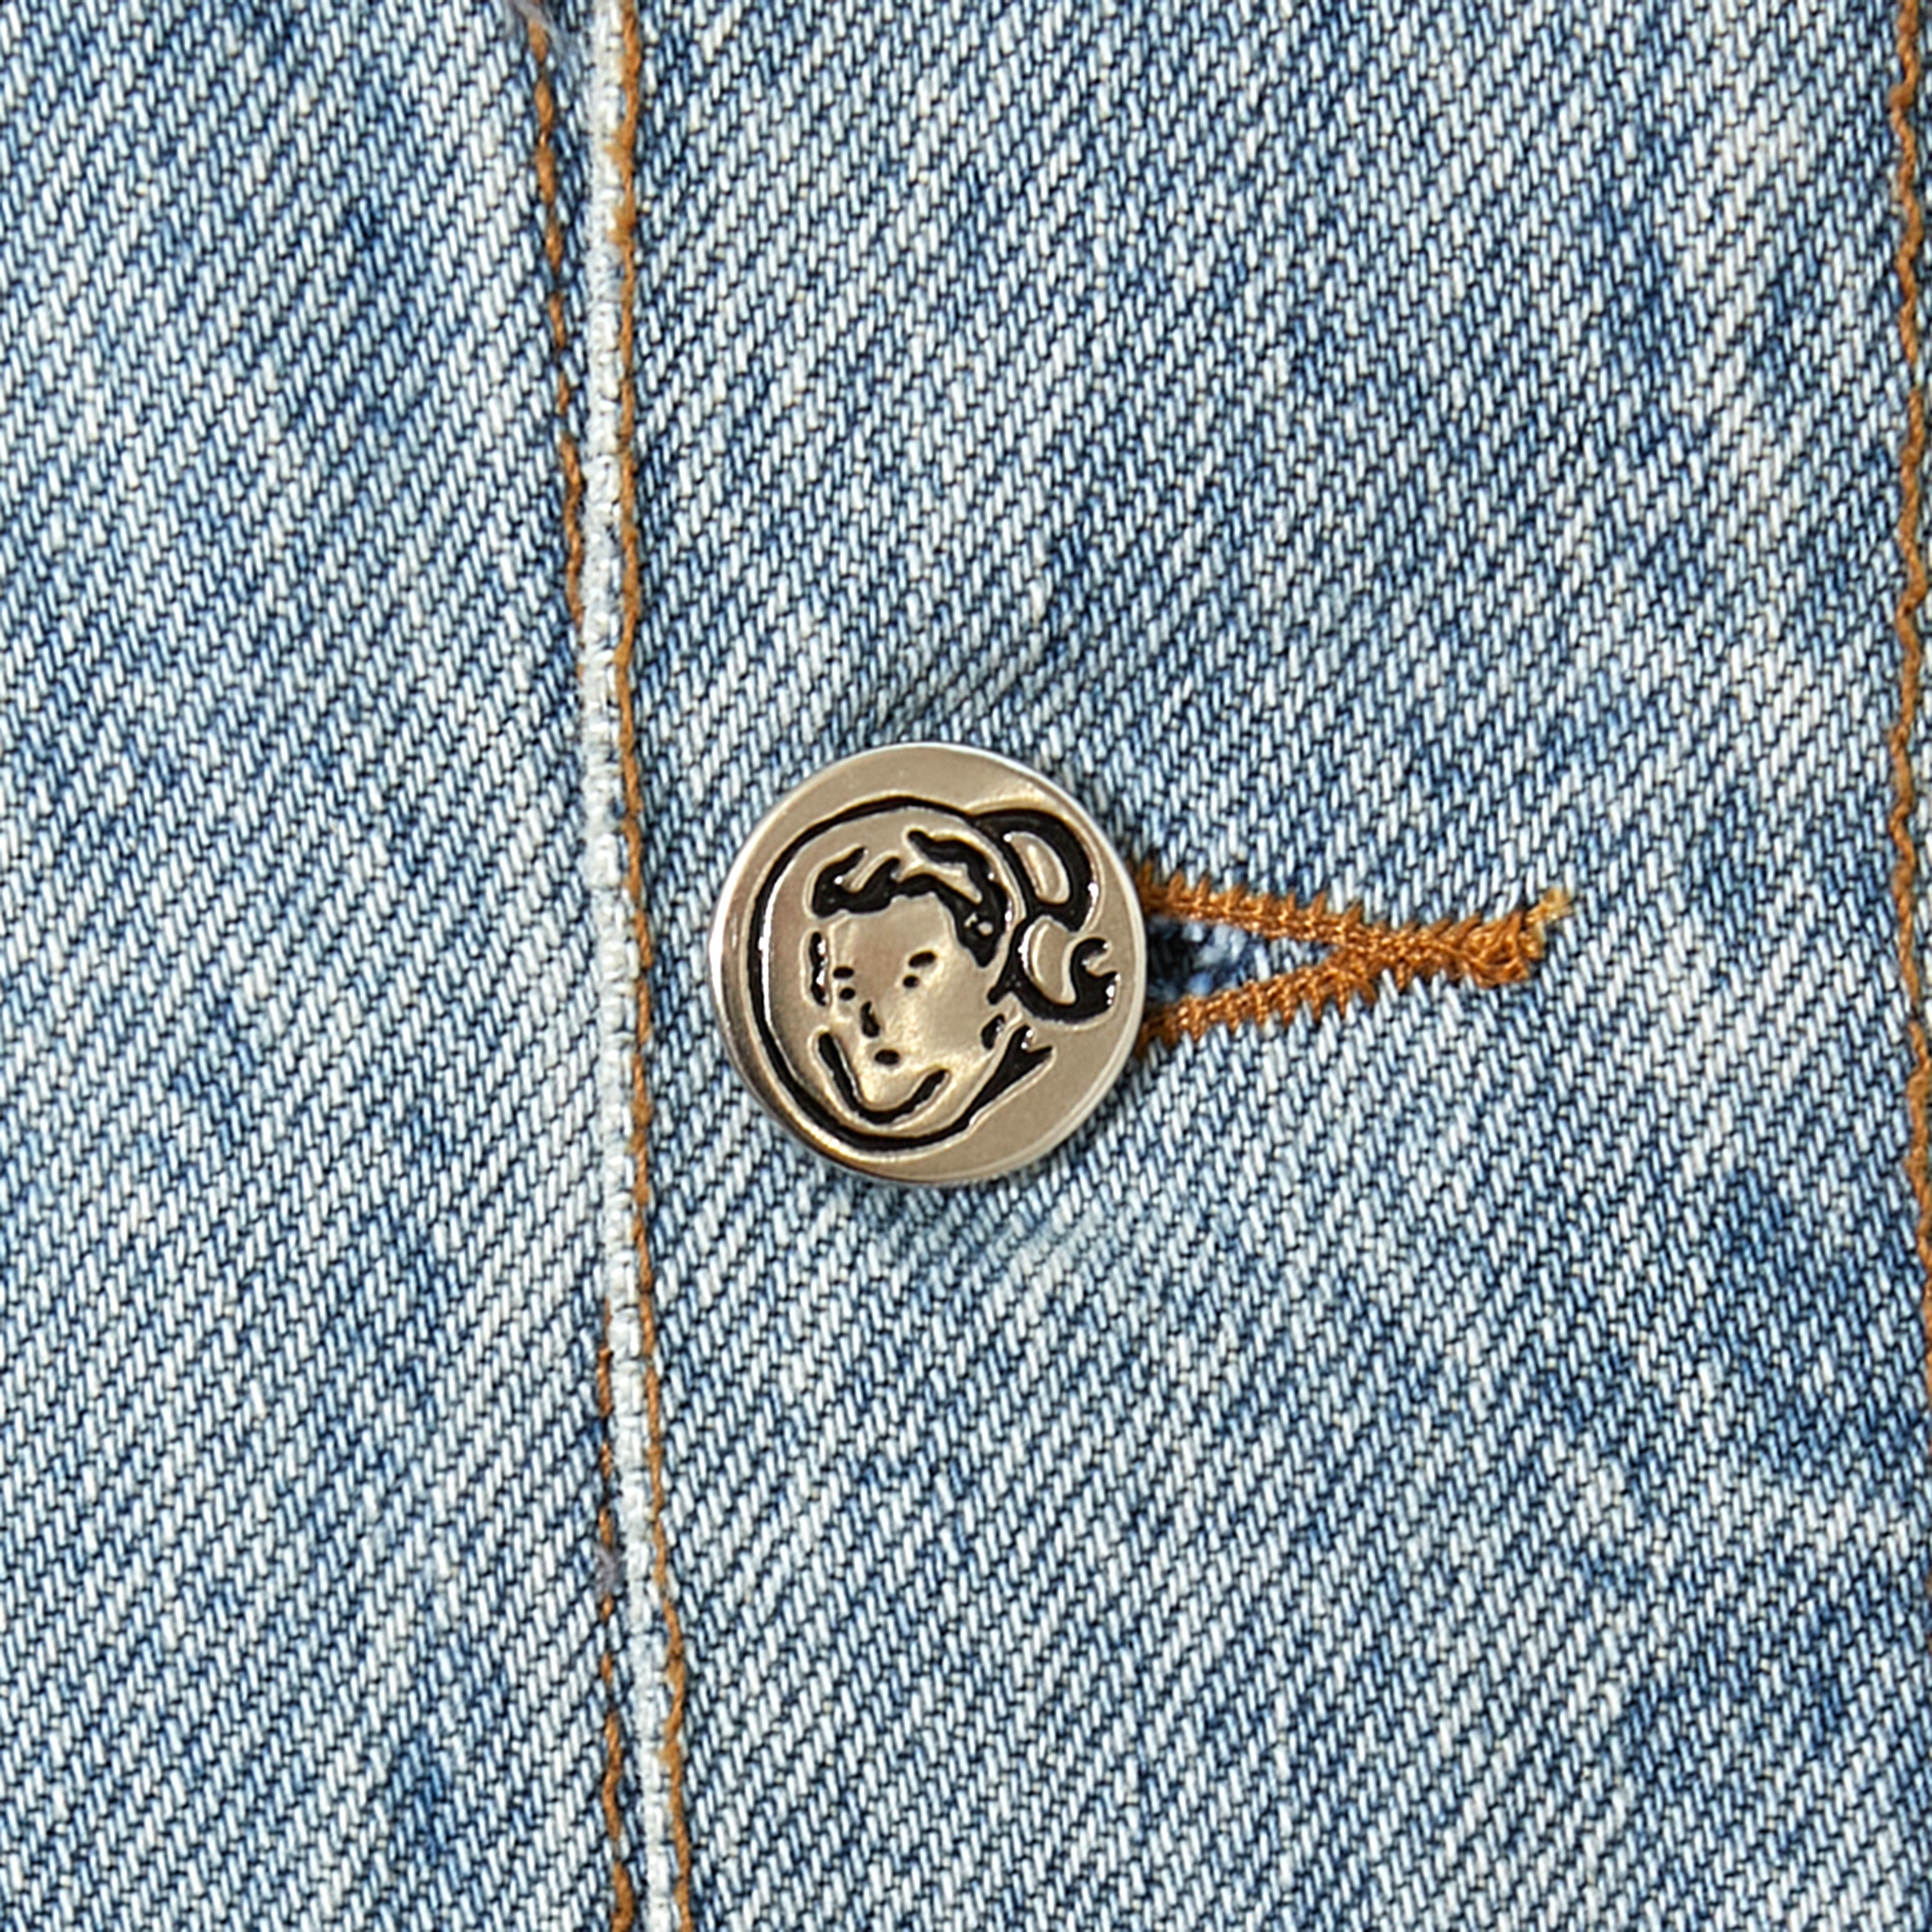 Load image into Gallery viewer, WASHED DENIM JACKET
